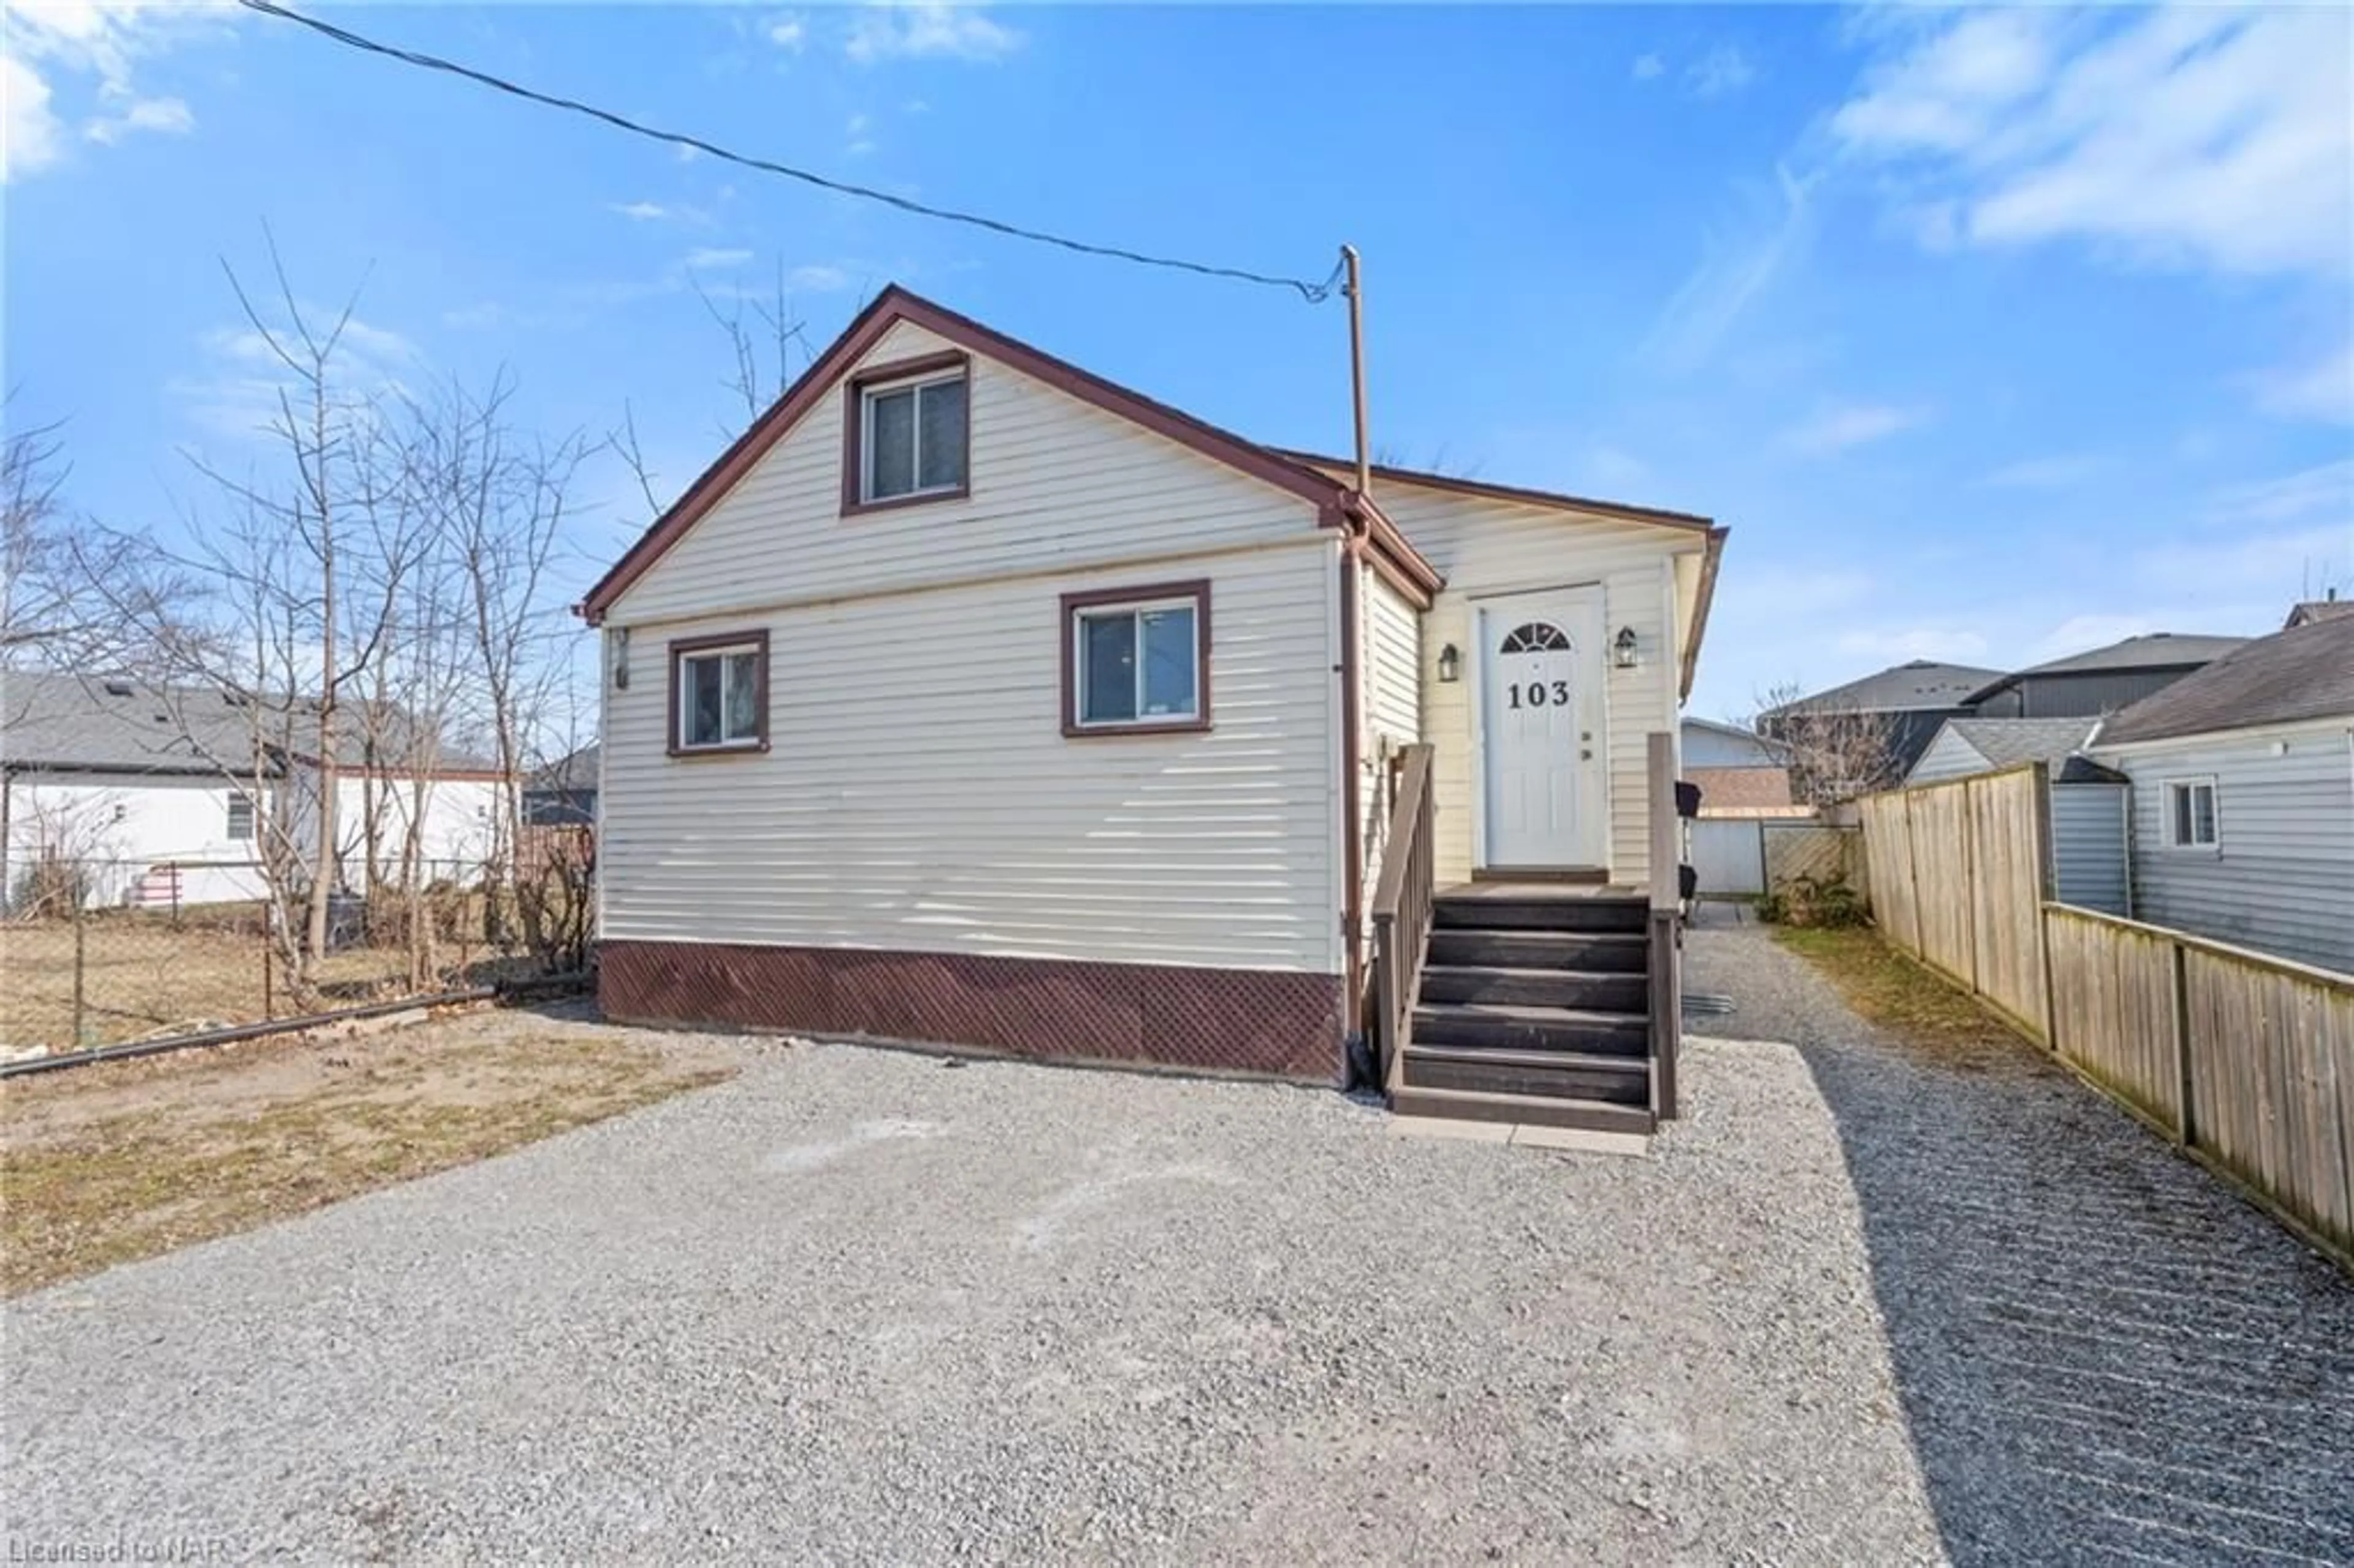 Cottage for 103 Powerview Ave, St. Catharines Ontario L2S 1X3